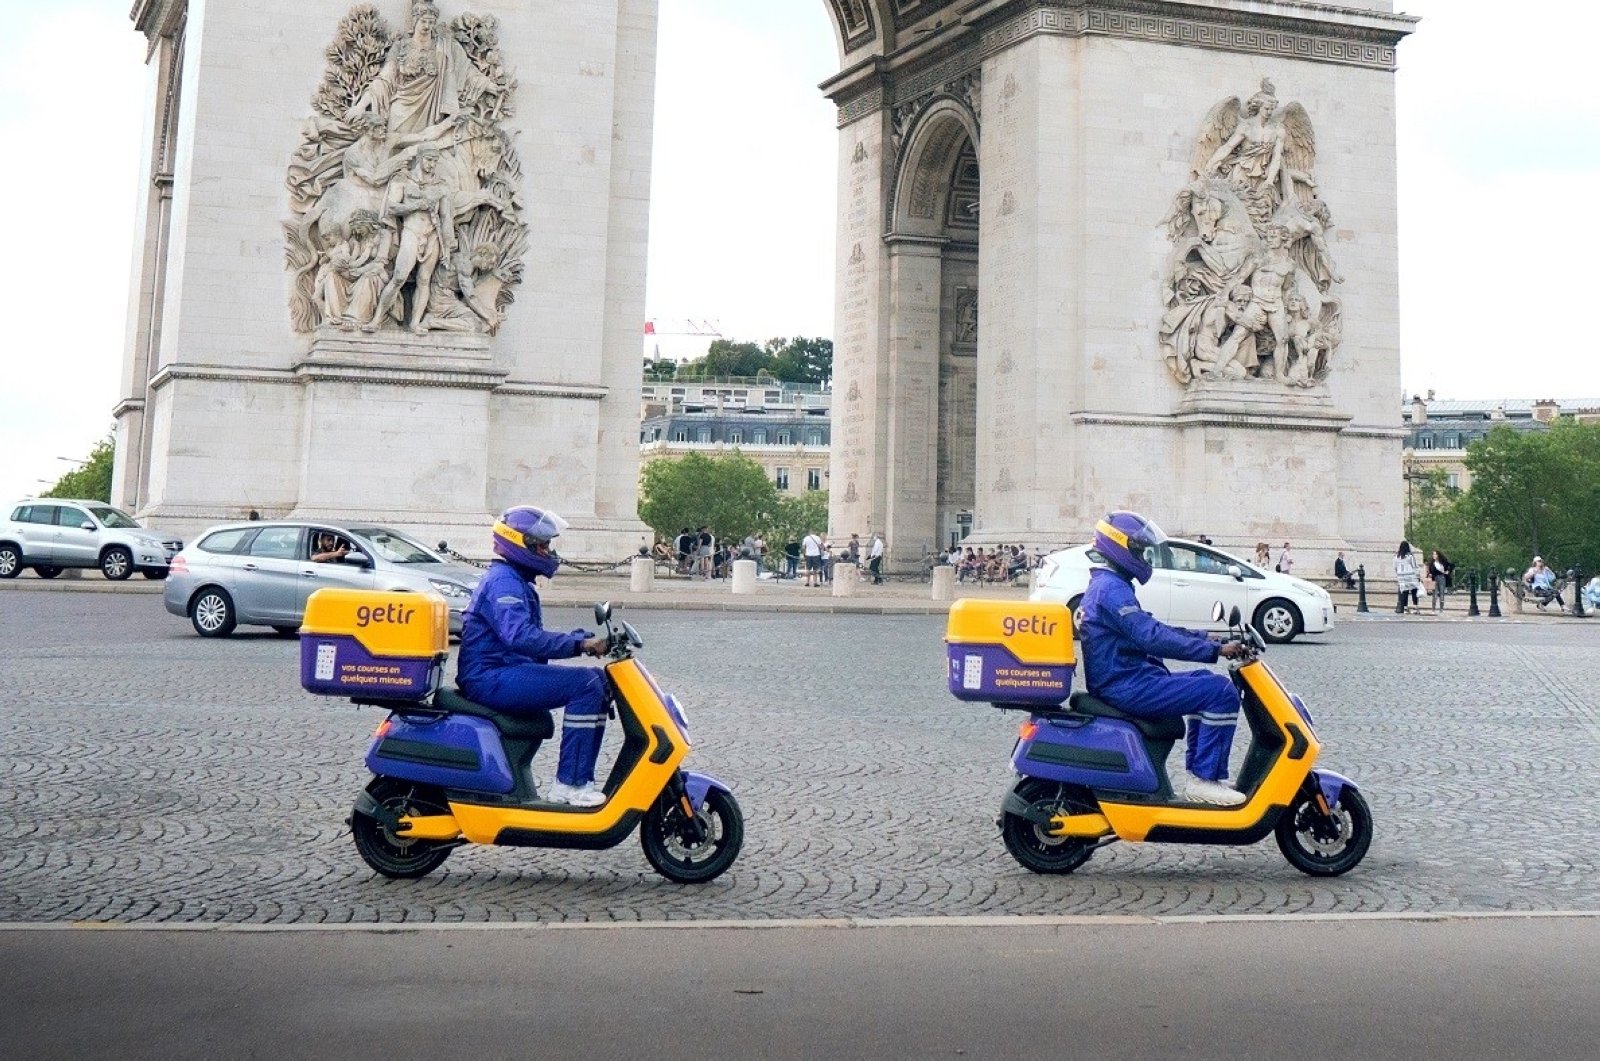 Turkish rapid delivery startup Getir hits Berlin, Paris streets | Daily ...